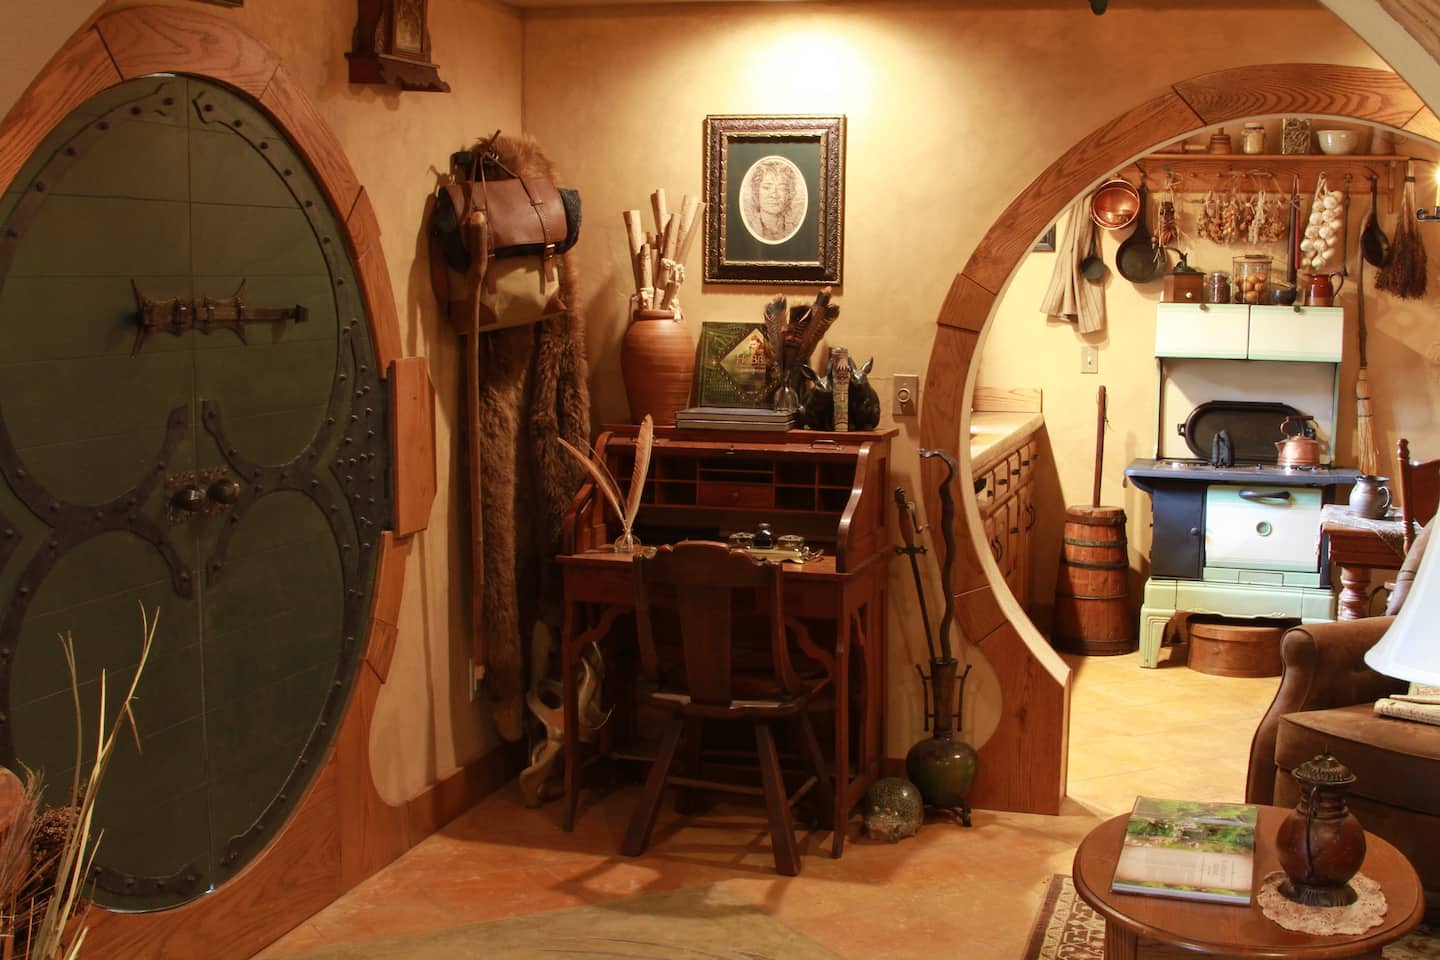 A hobbit themed house as one of the best Airbnbs in the United States